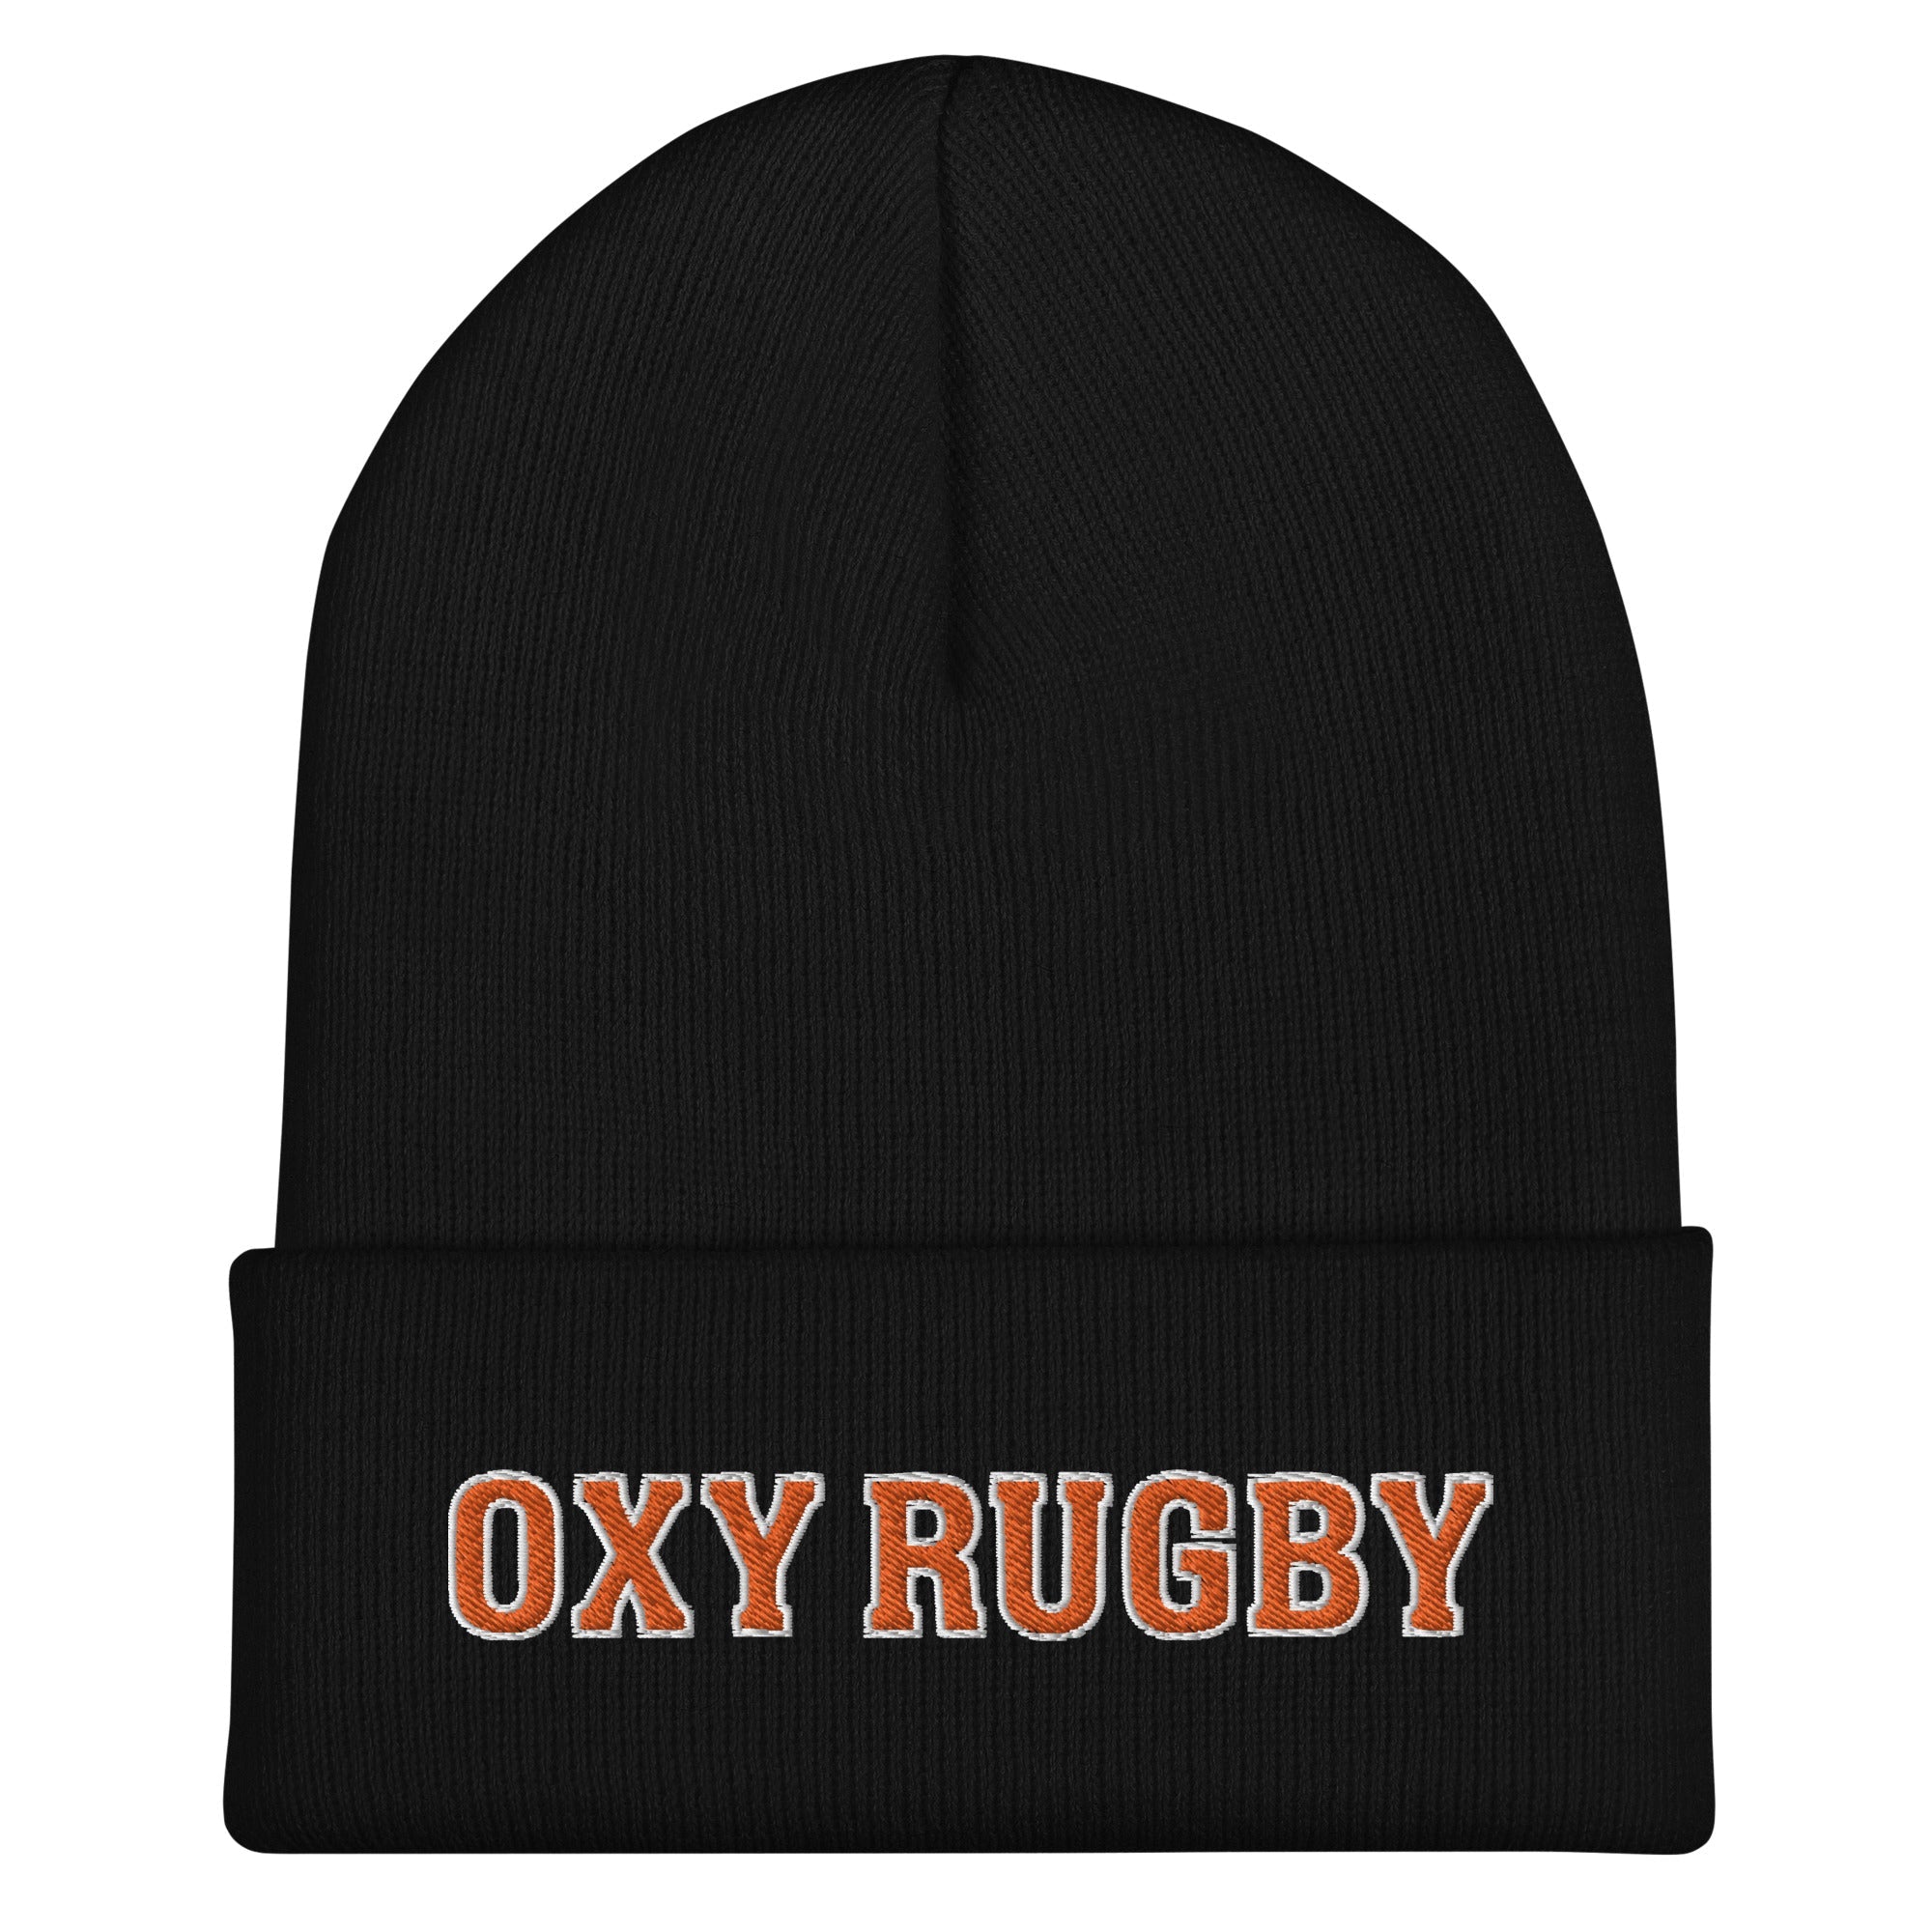 Rugby Imports Oxy Rugby Text Logo Cuffed Beanie